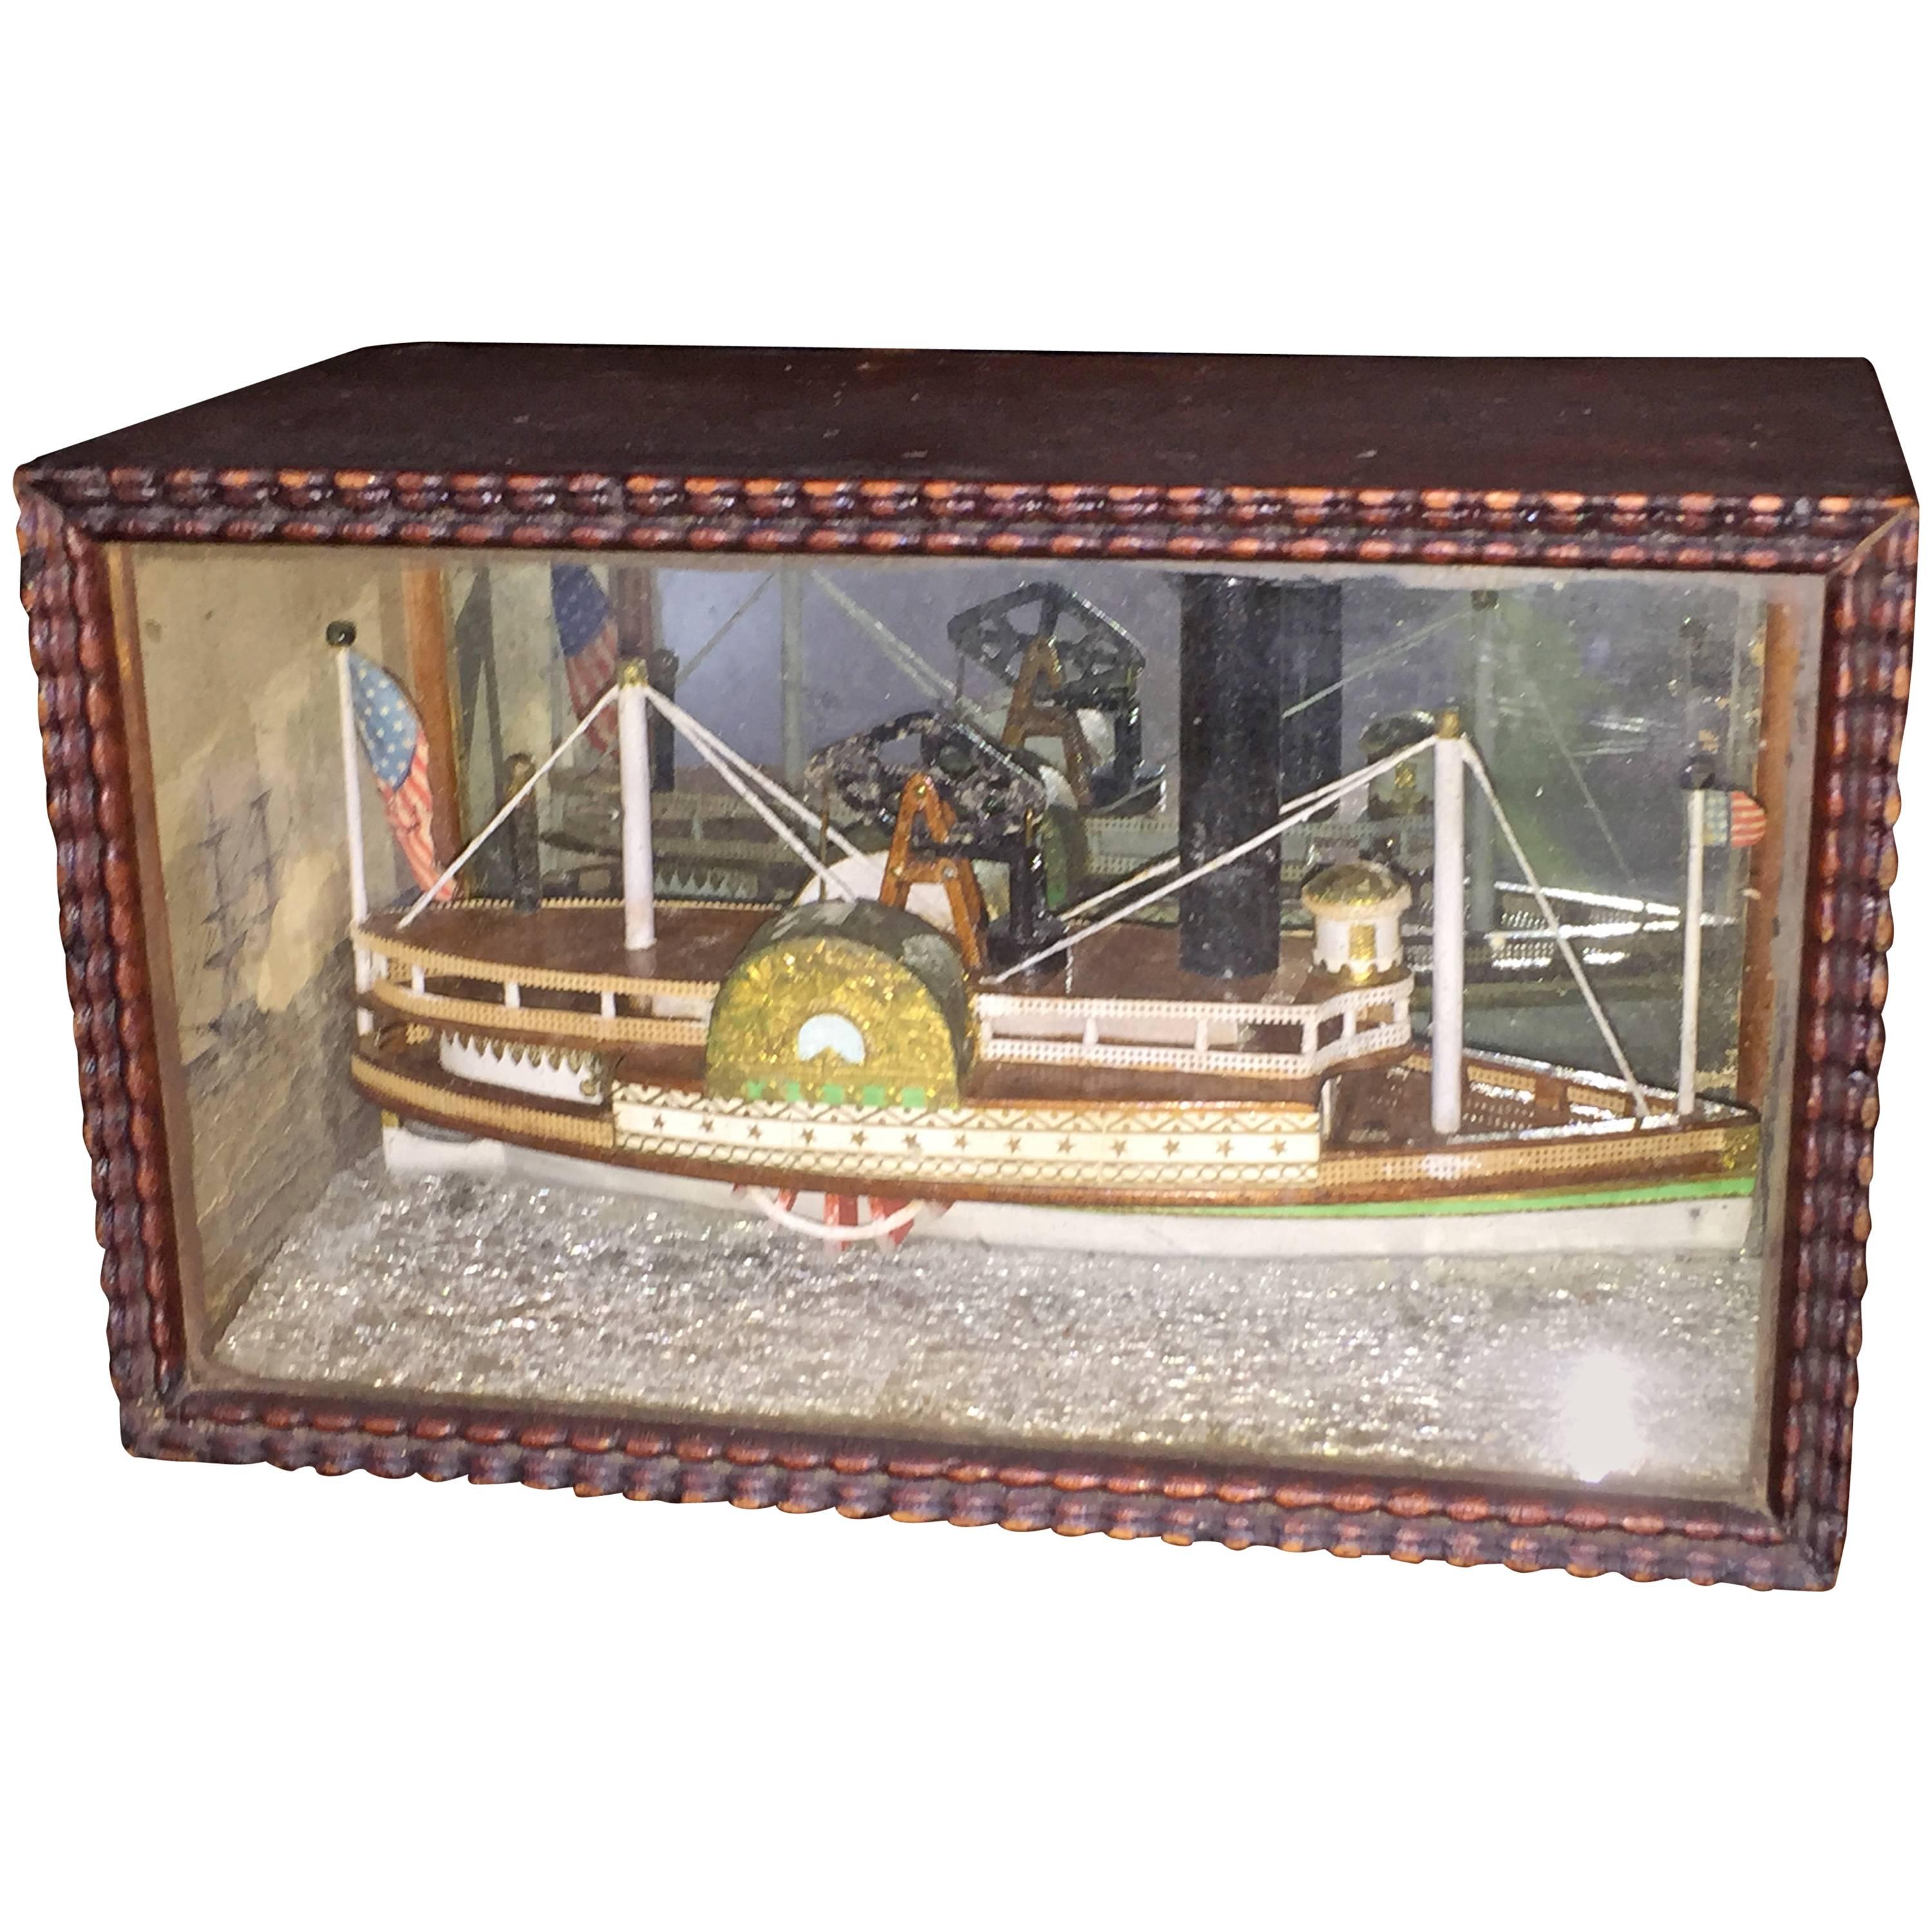 Antique American Tiny Diorama of Steamship